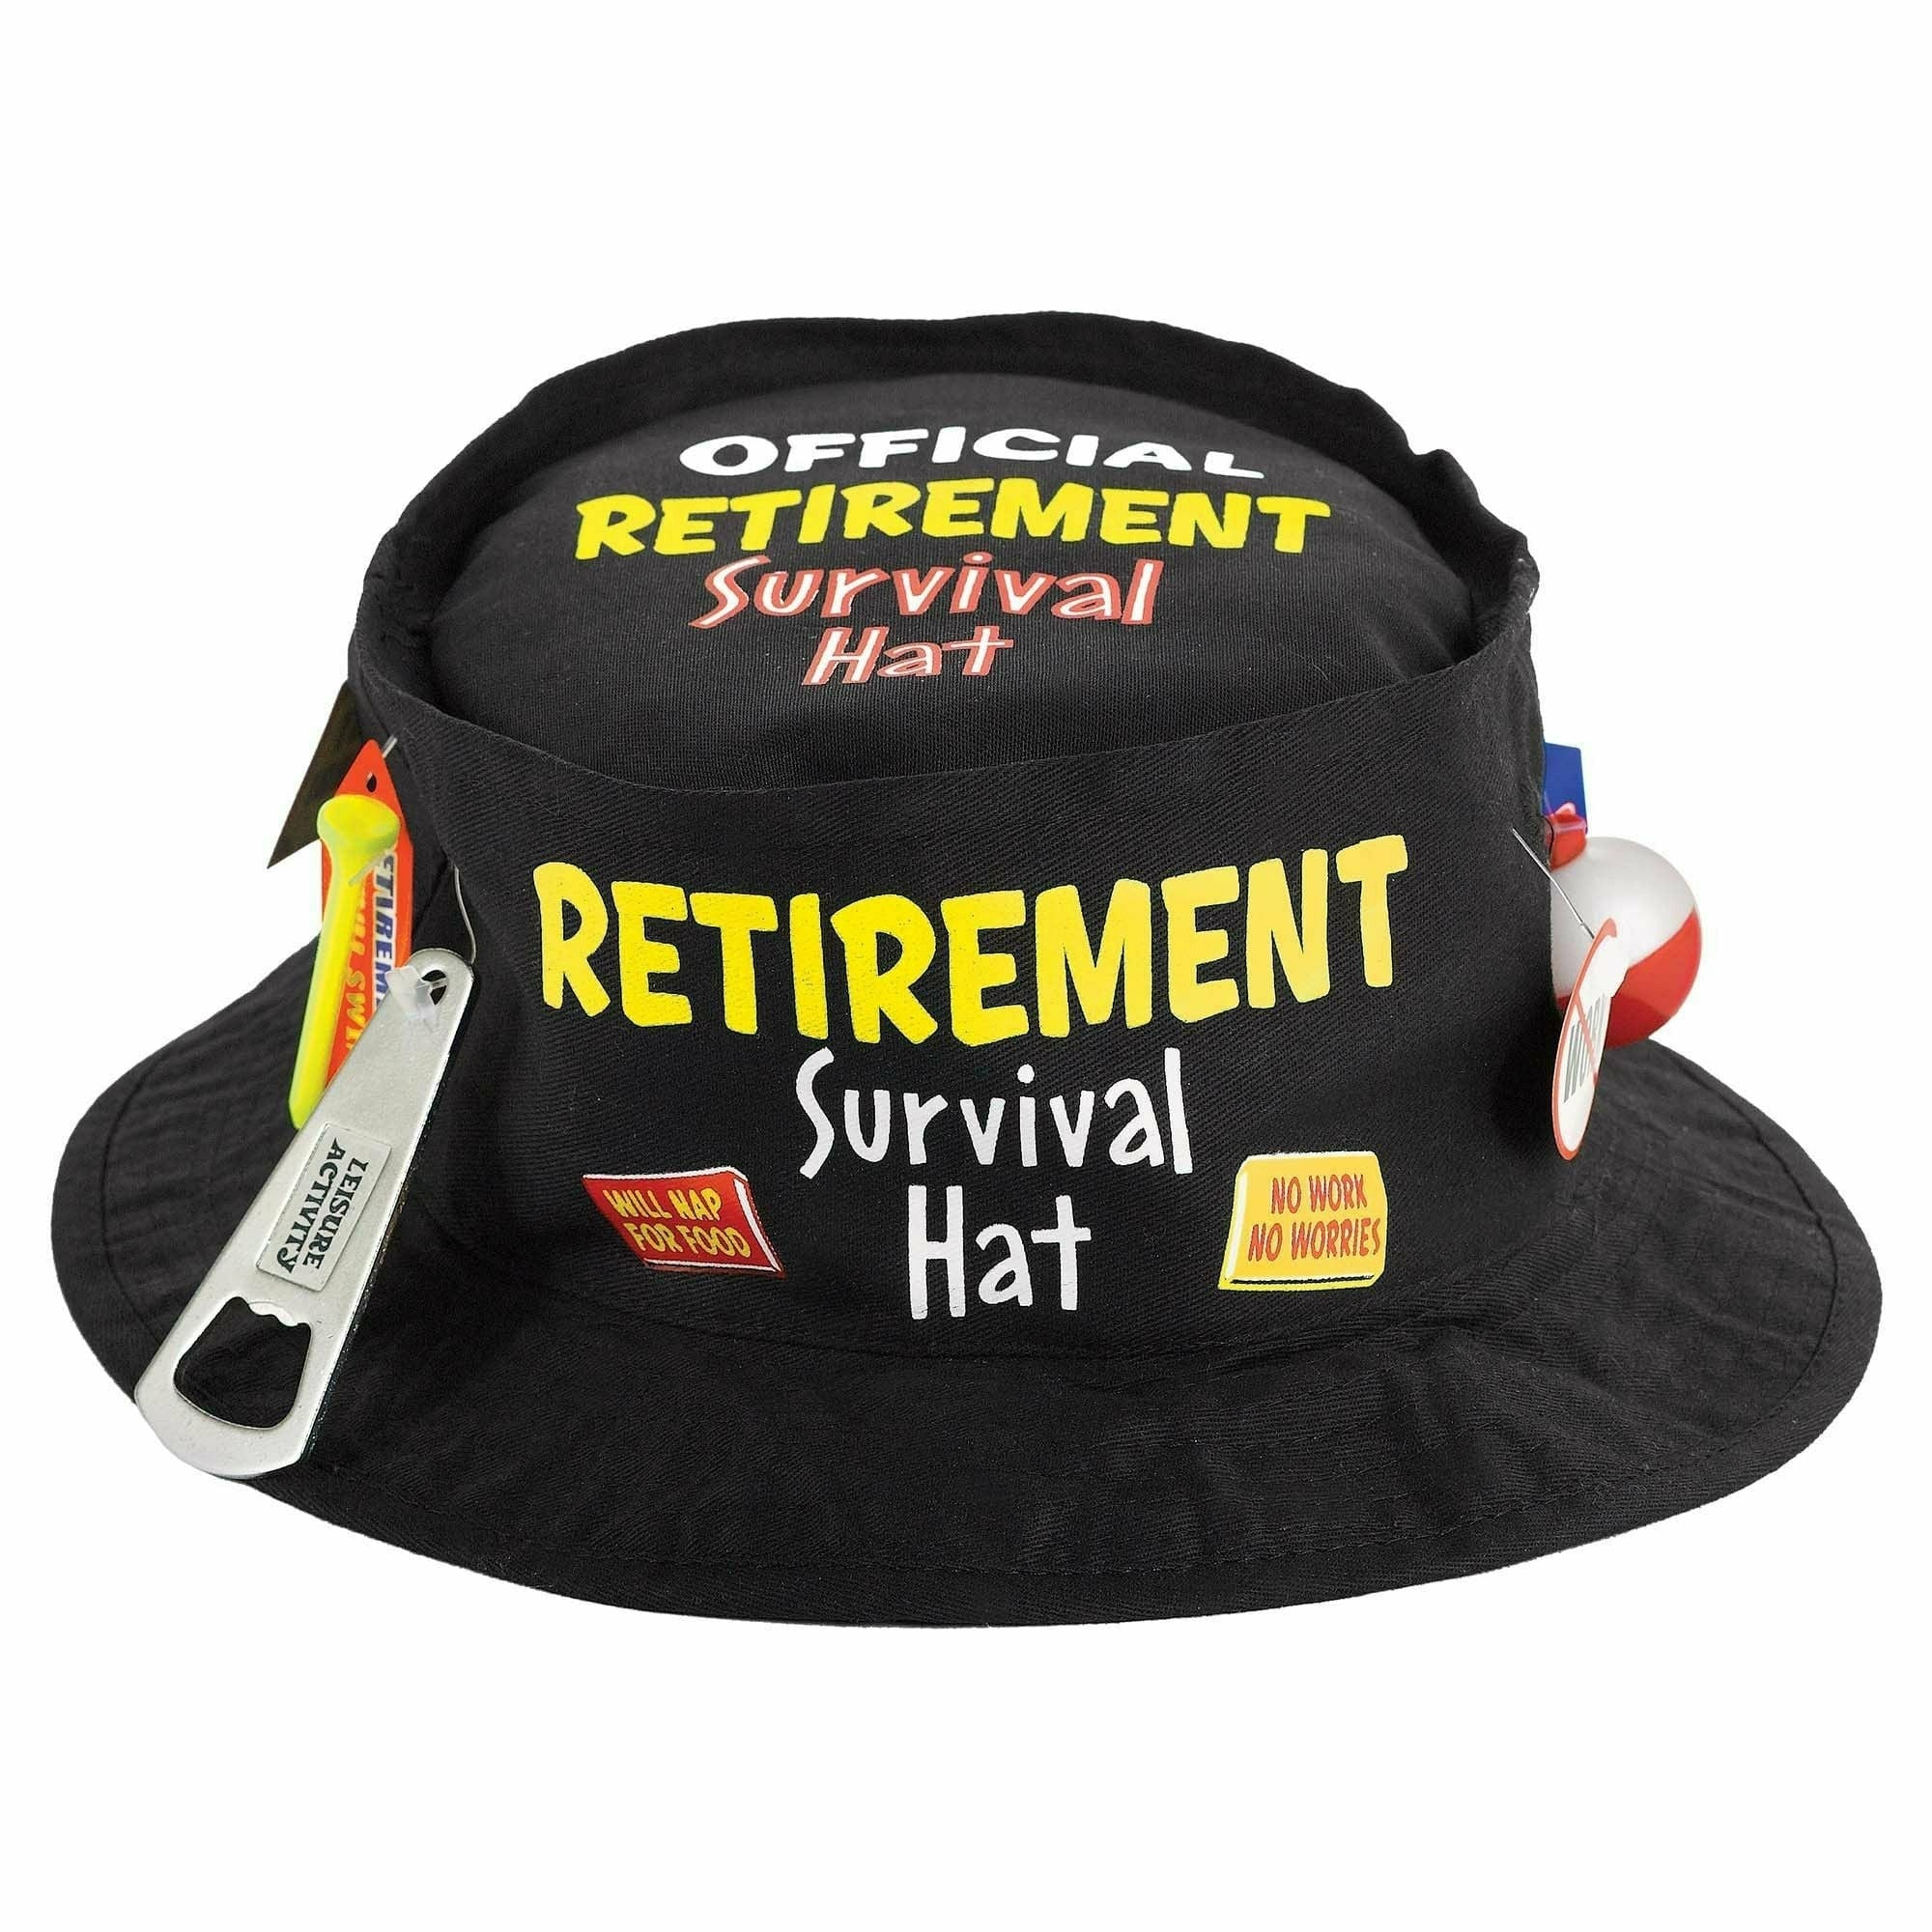 Amscan THEME Officially Retired Survival Hat